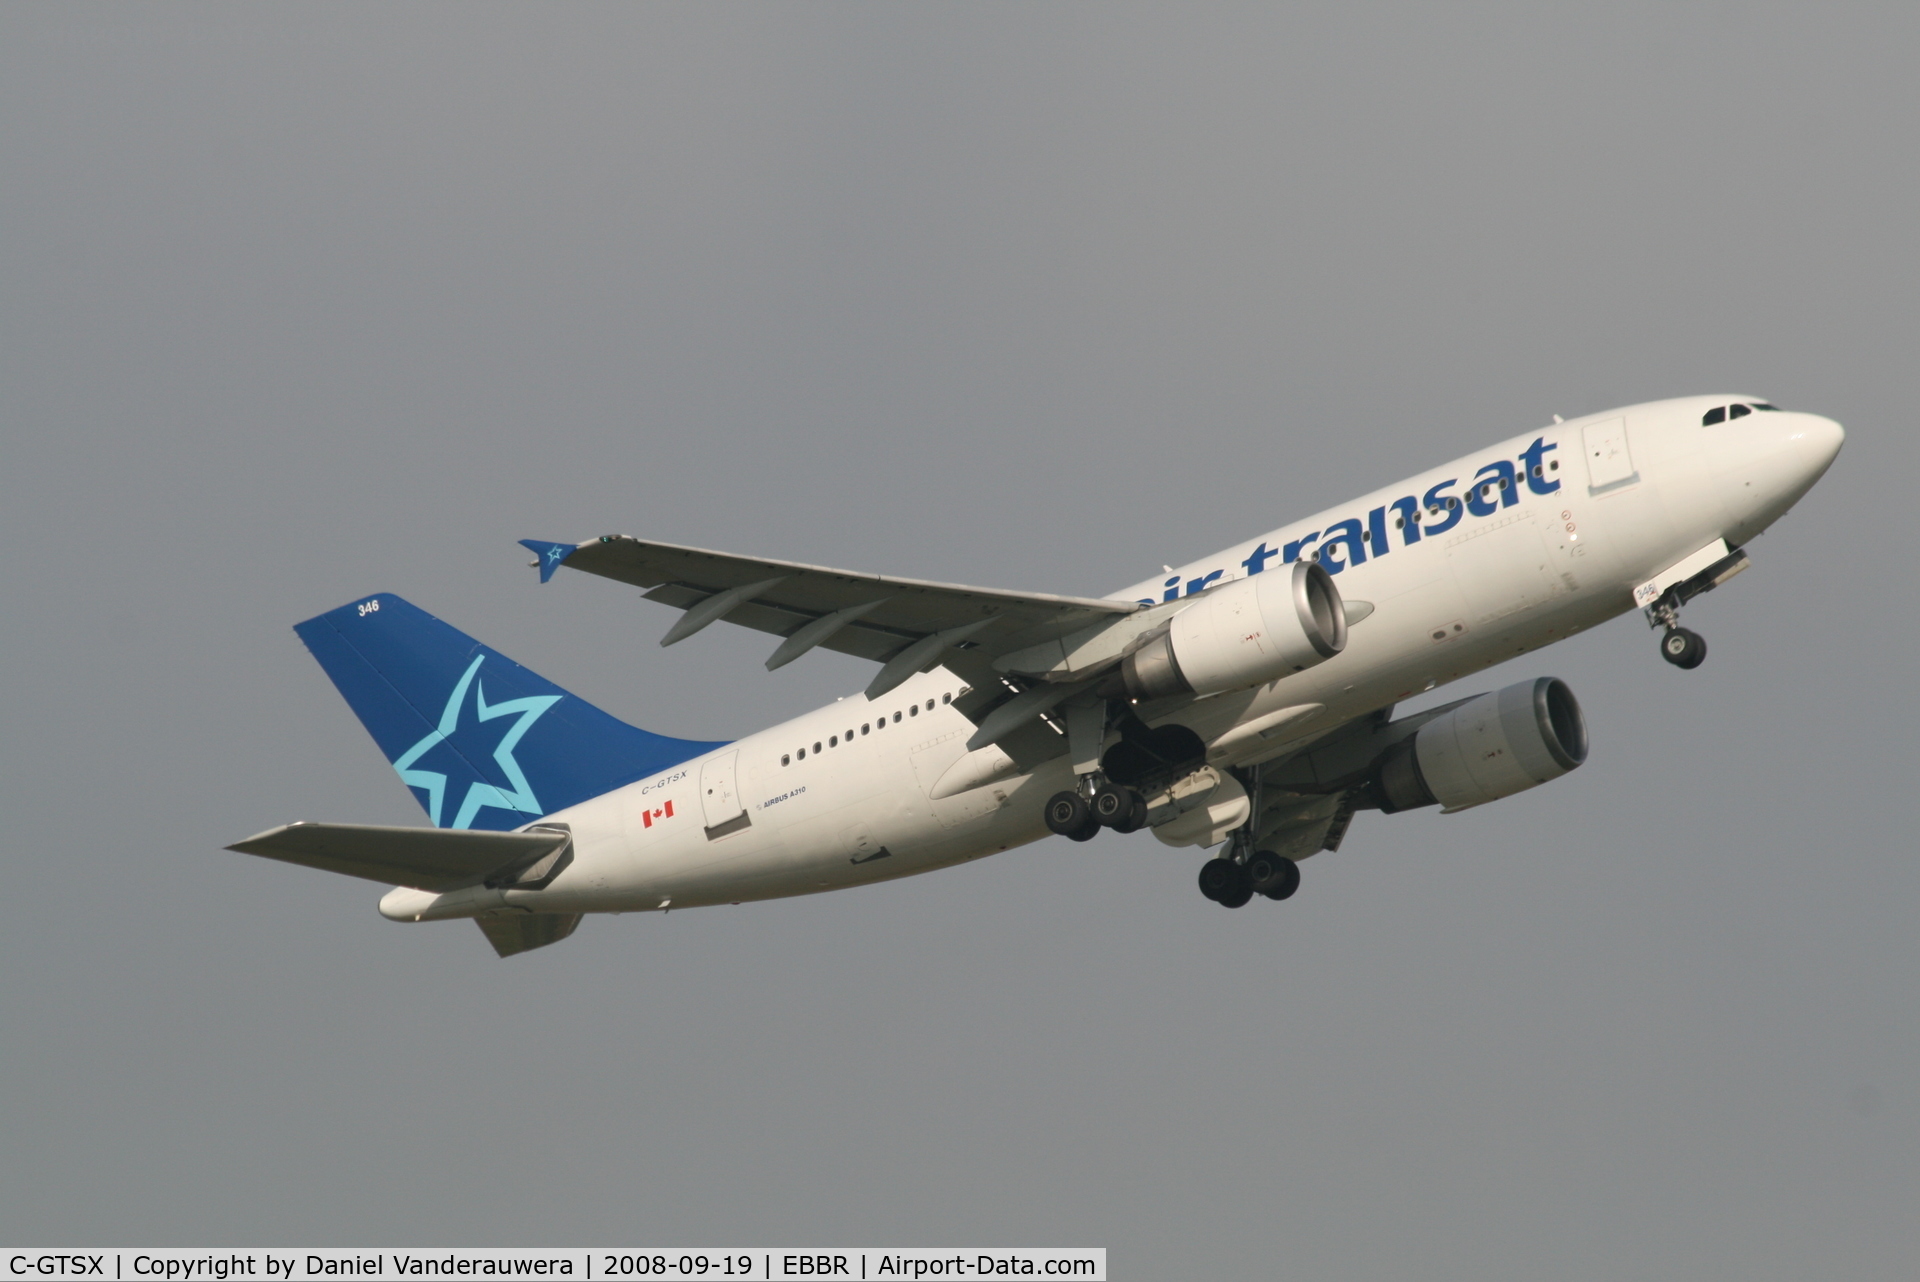 C-GTSX, 1989 Airbus A310-304 C/N 527, Flight TSC155 is taking off from RWY 07R